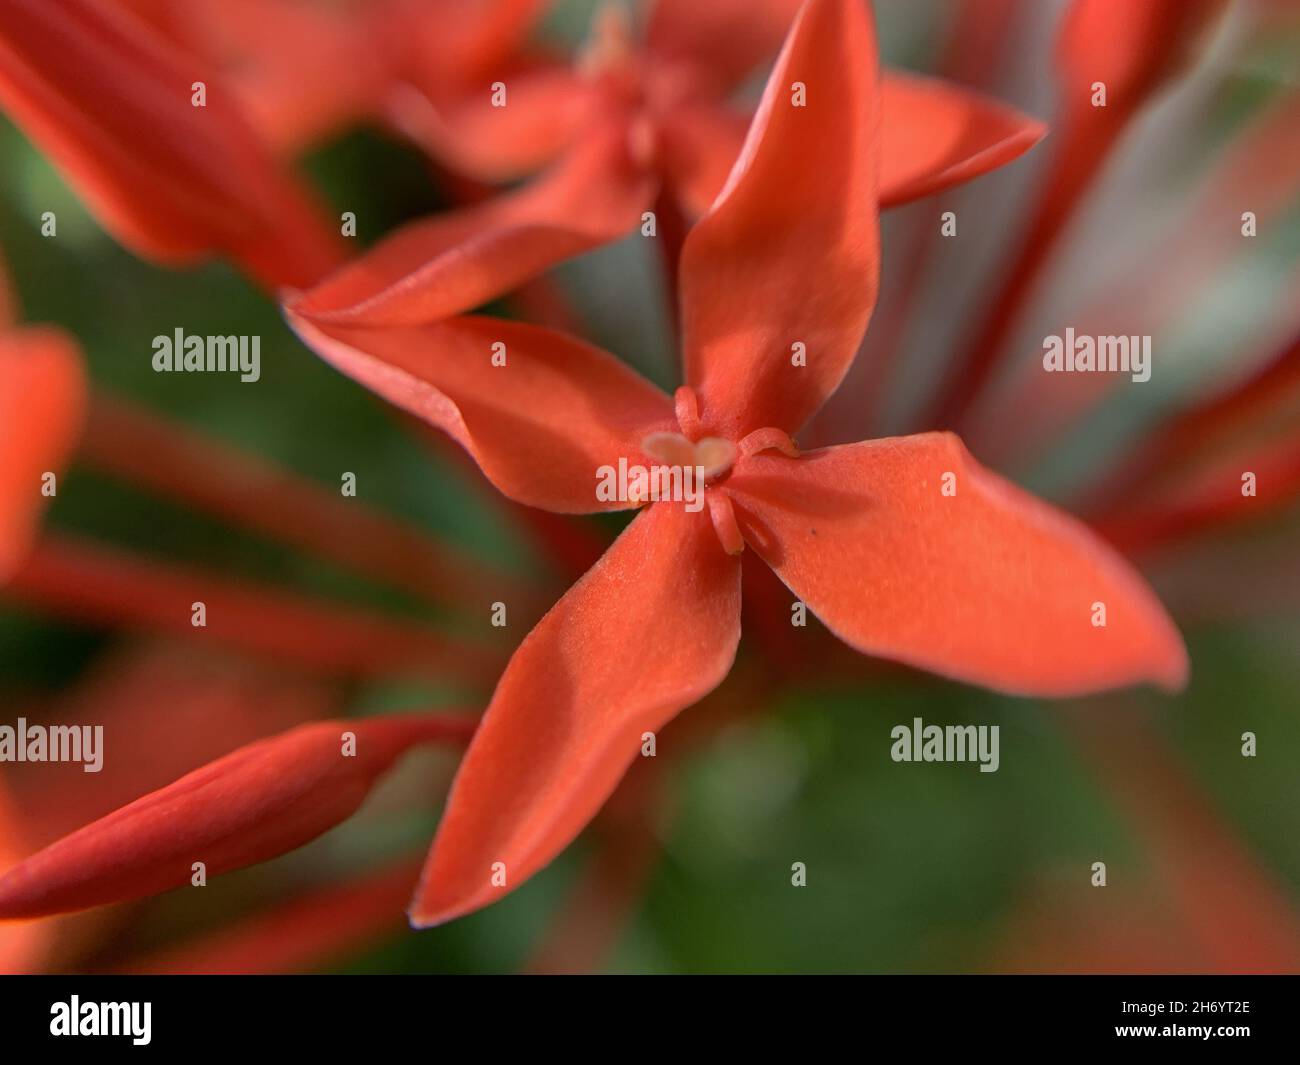 Closeup of beautiful red Epidendrum orchid flowers in a garden Stock Photo